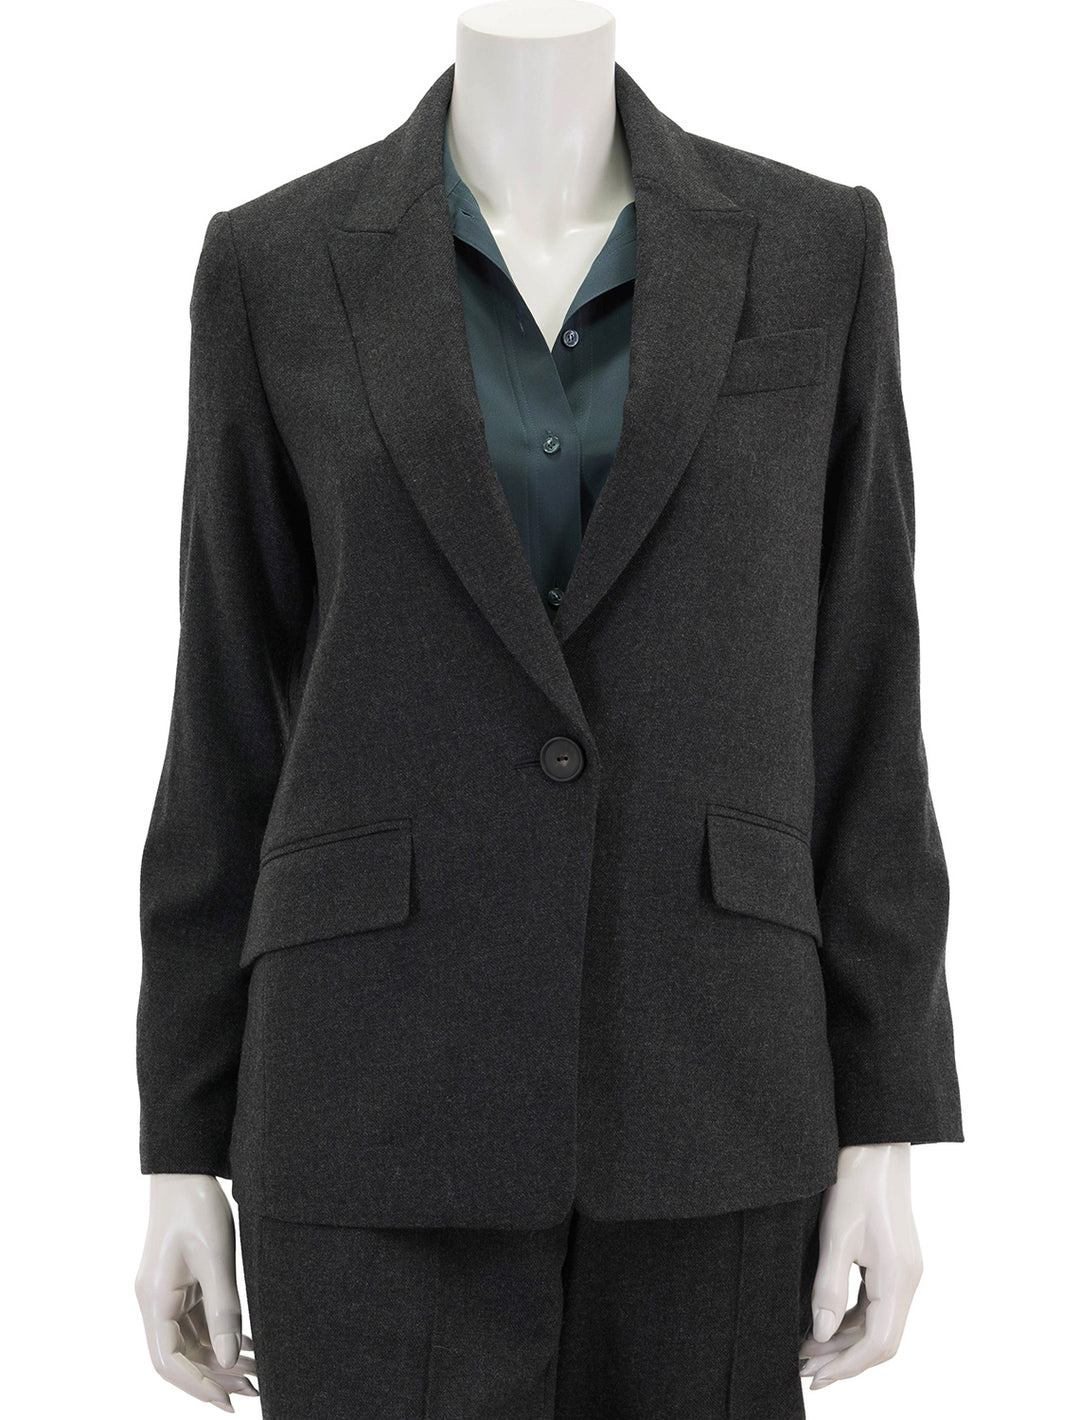 Front view of Vince's charcoal single breasted blazer, buttoned.